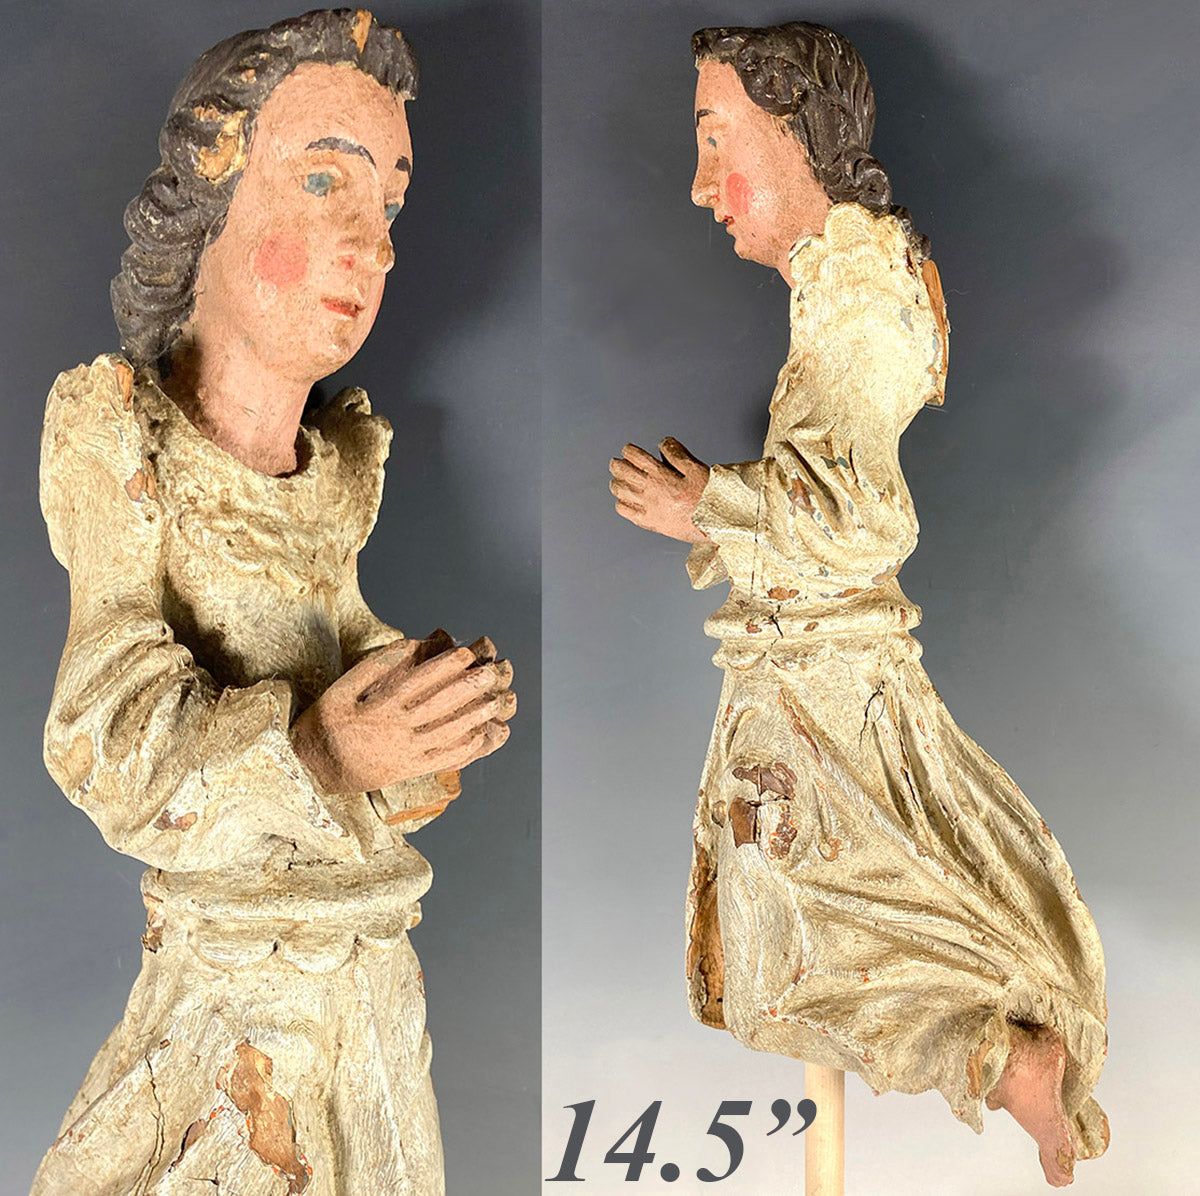 Antique French Carved and Polychromed 14.5" Kneeling Angel, 18th Century Sculpture Fragment